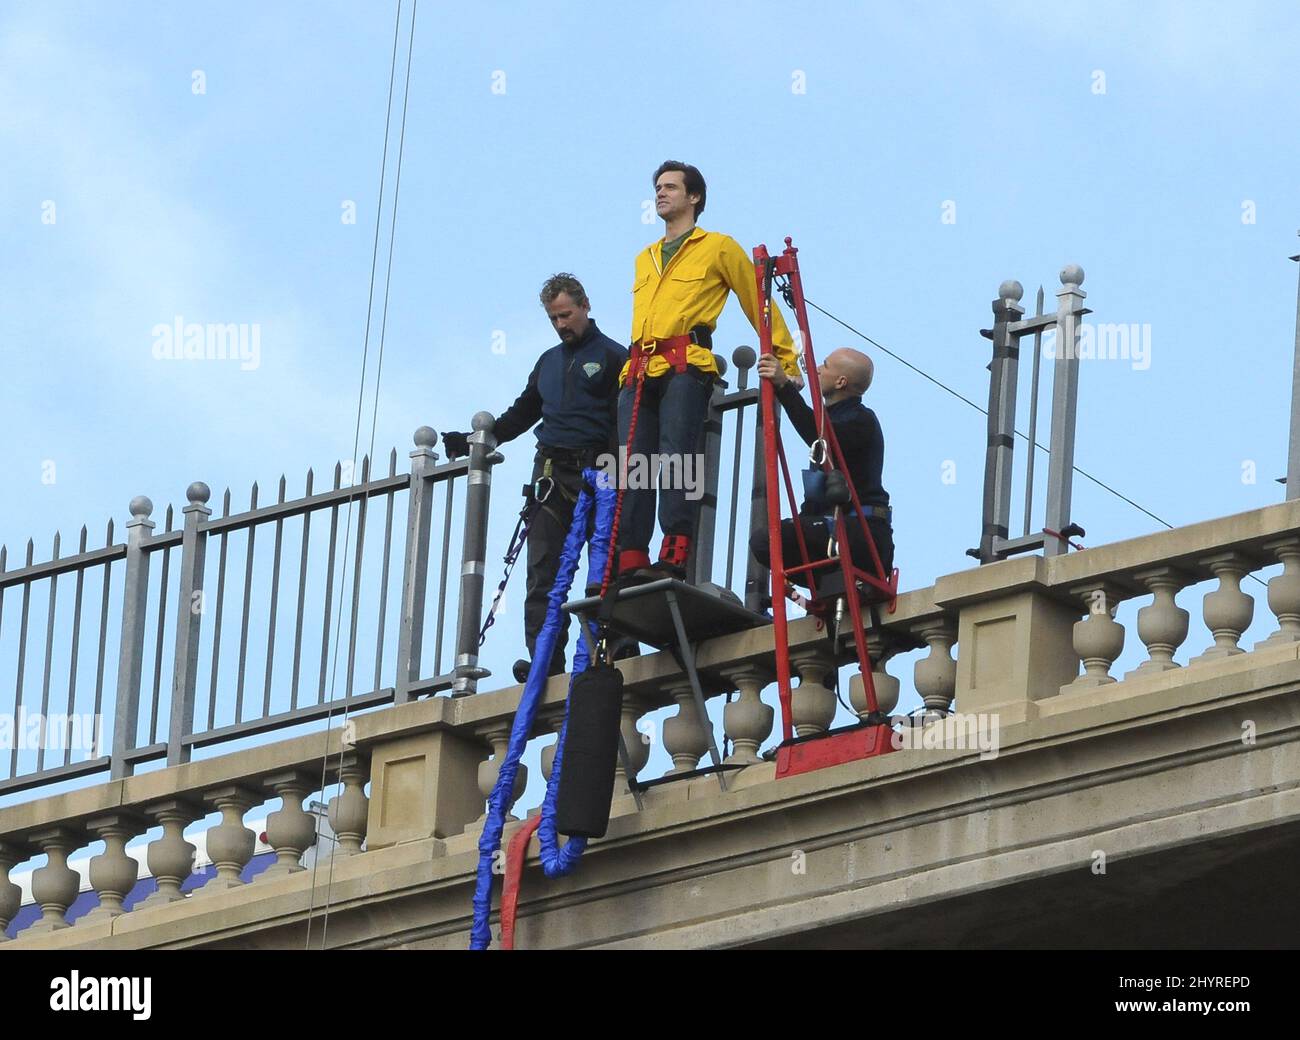 Jim Carrey bungee jumps during filming of his new movie 'Yes Man' held at the Arroyo Seco Bridge in Pasadena, CA. Stock Photo